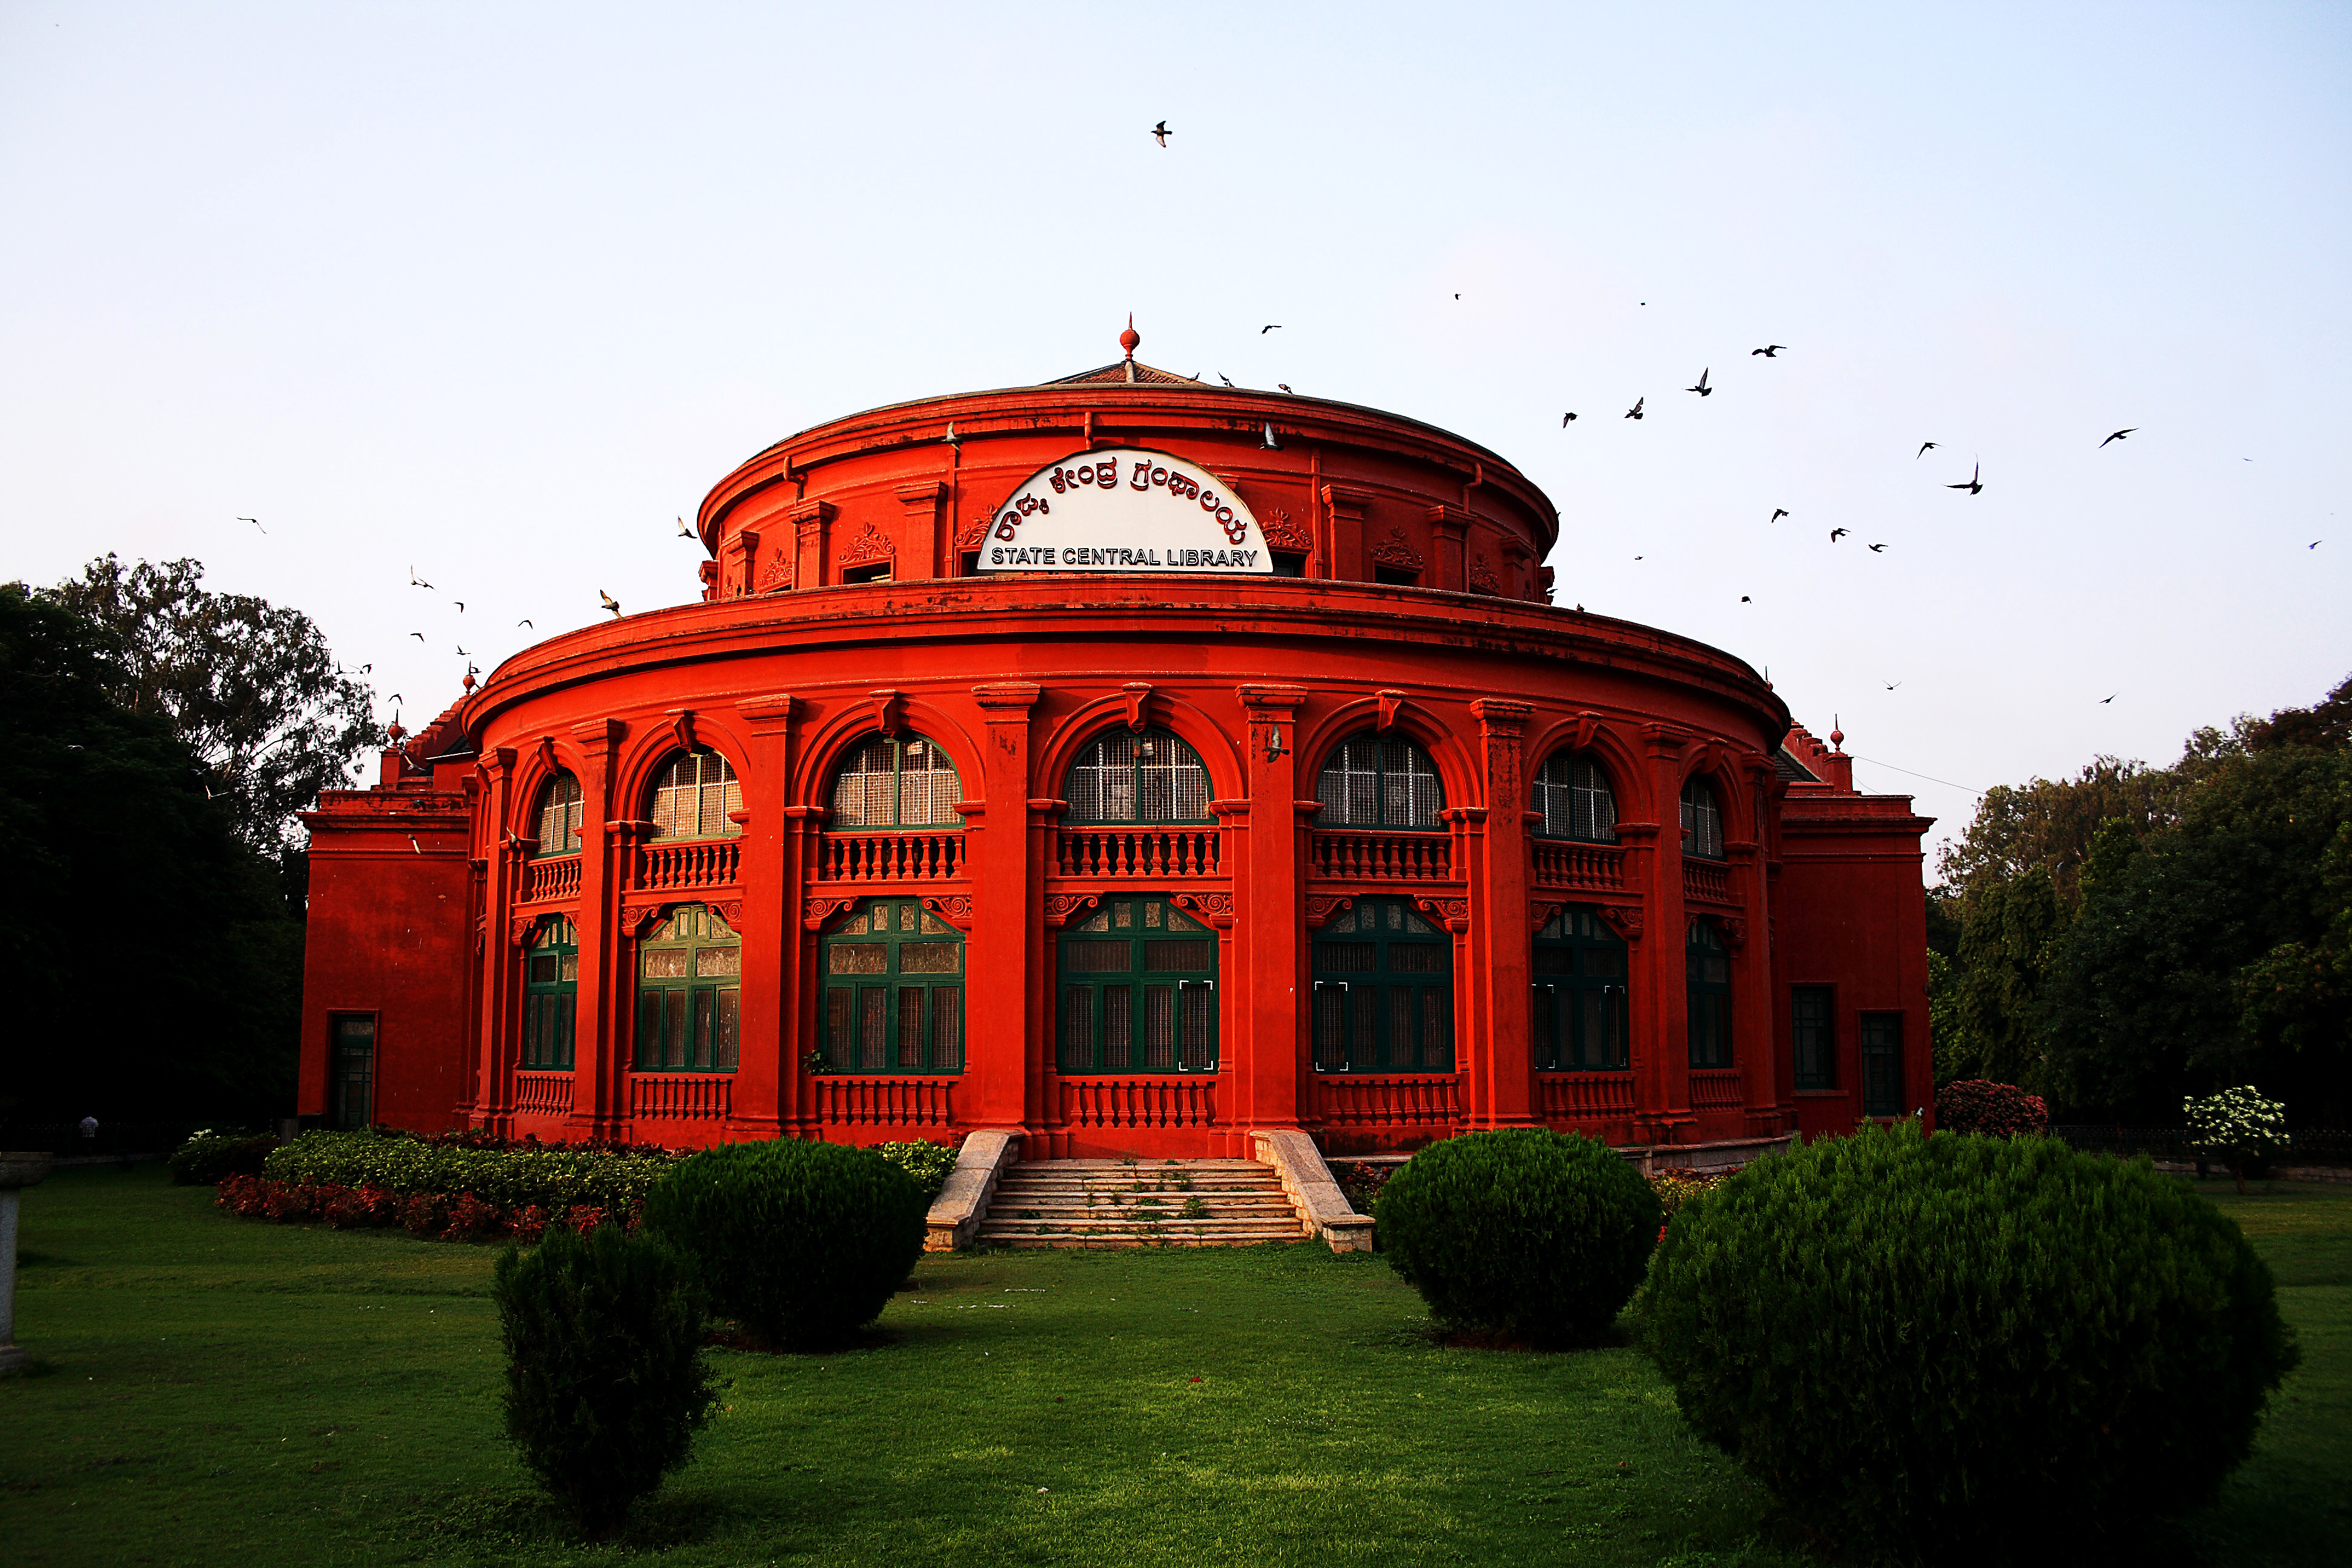 Bangalore City Central Library